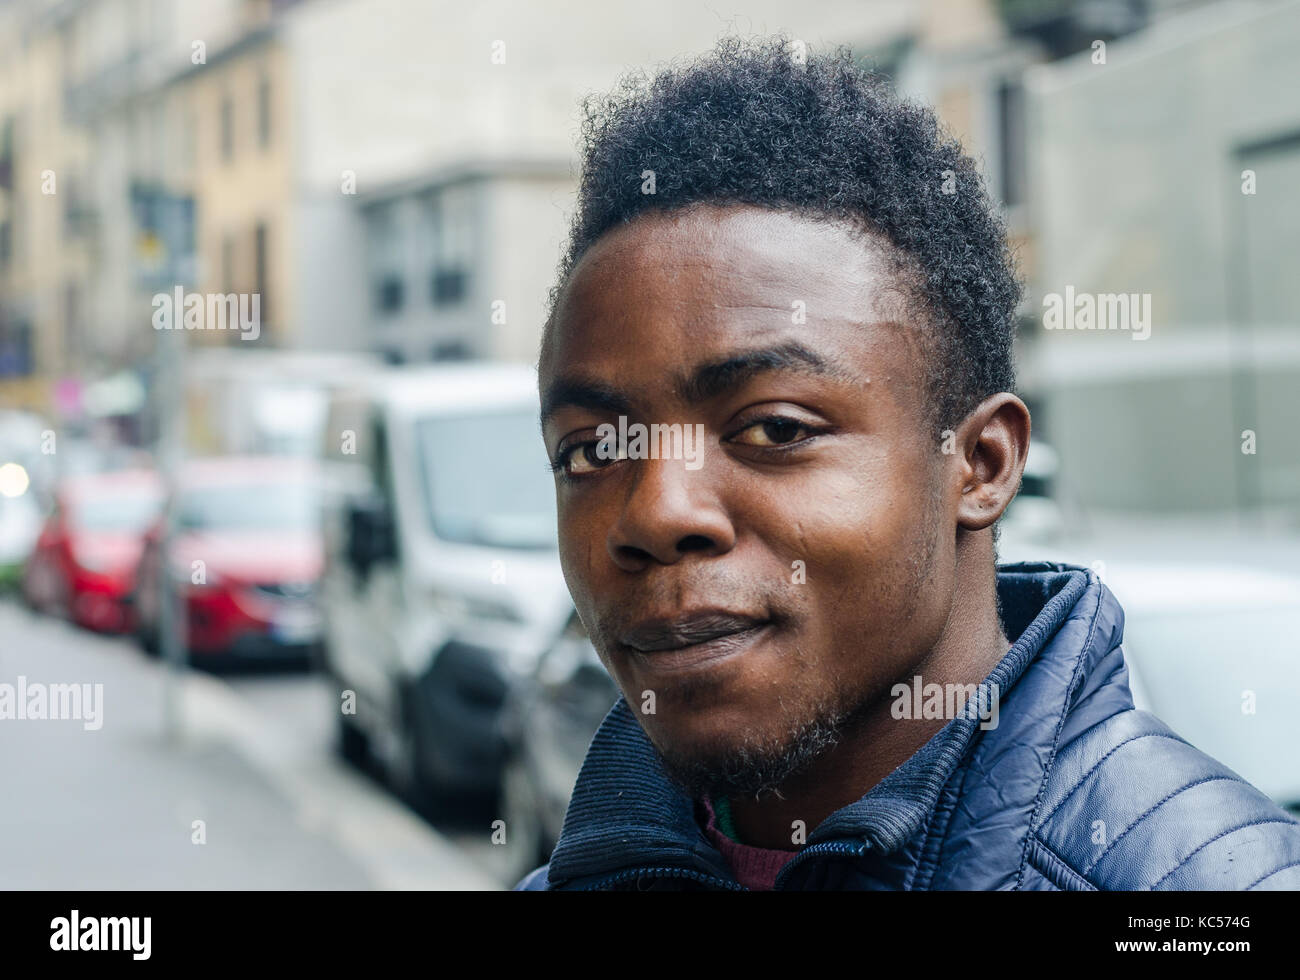 A Nigerian refugee poses for a photo in Milan, Italy. His  nickname is 'Elvis'. Europe is undergroing a refugee crisis. Stock Photo